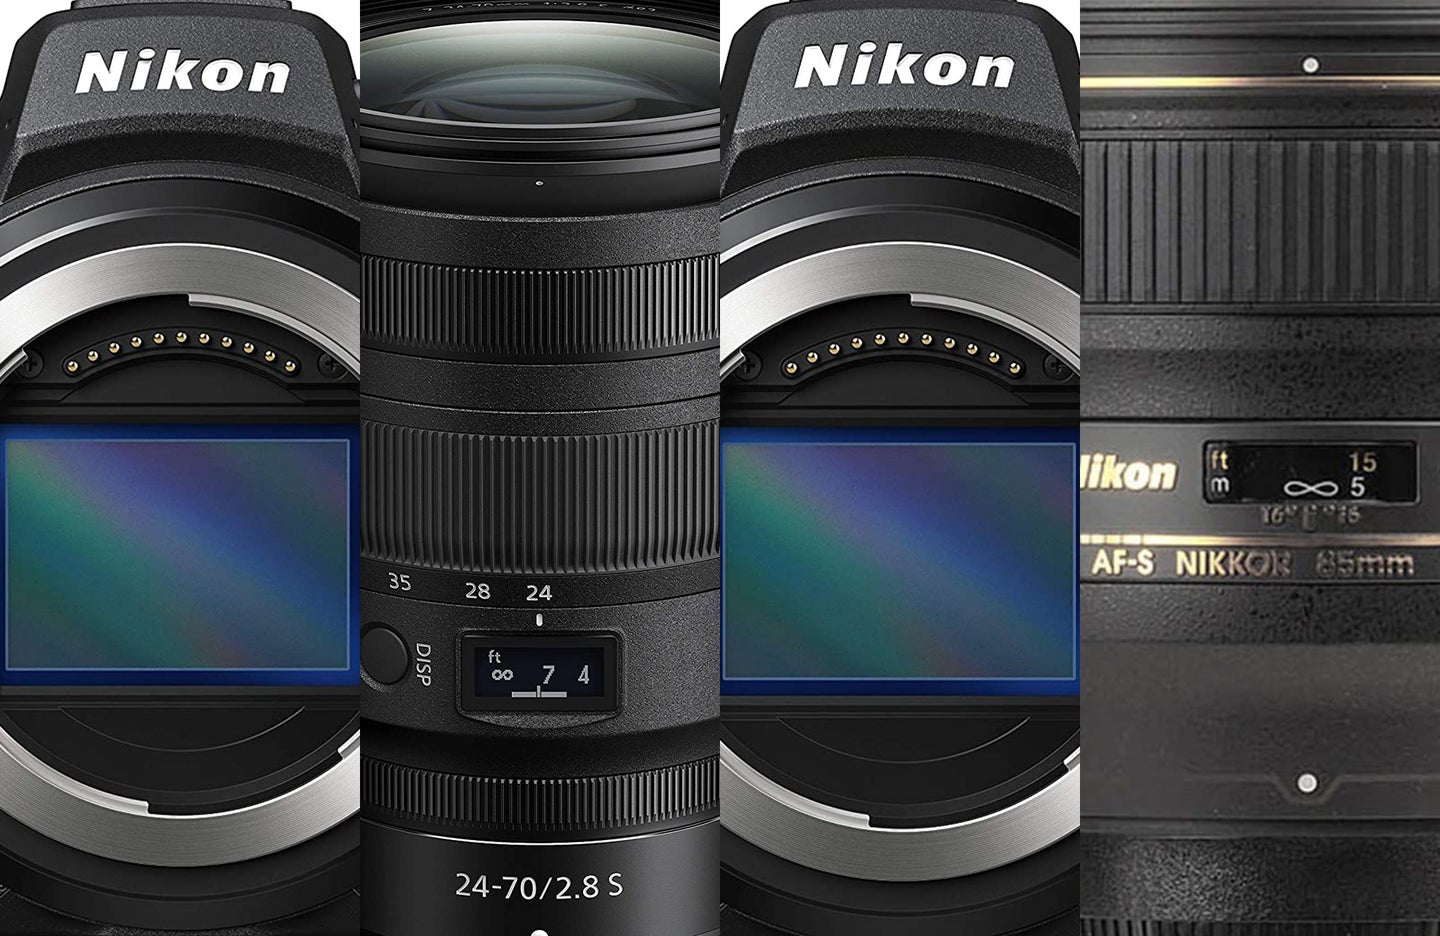 Save on Nikon cameras and lenses right now on Amazon.